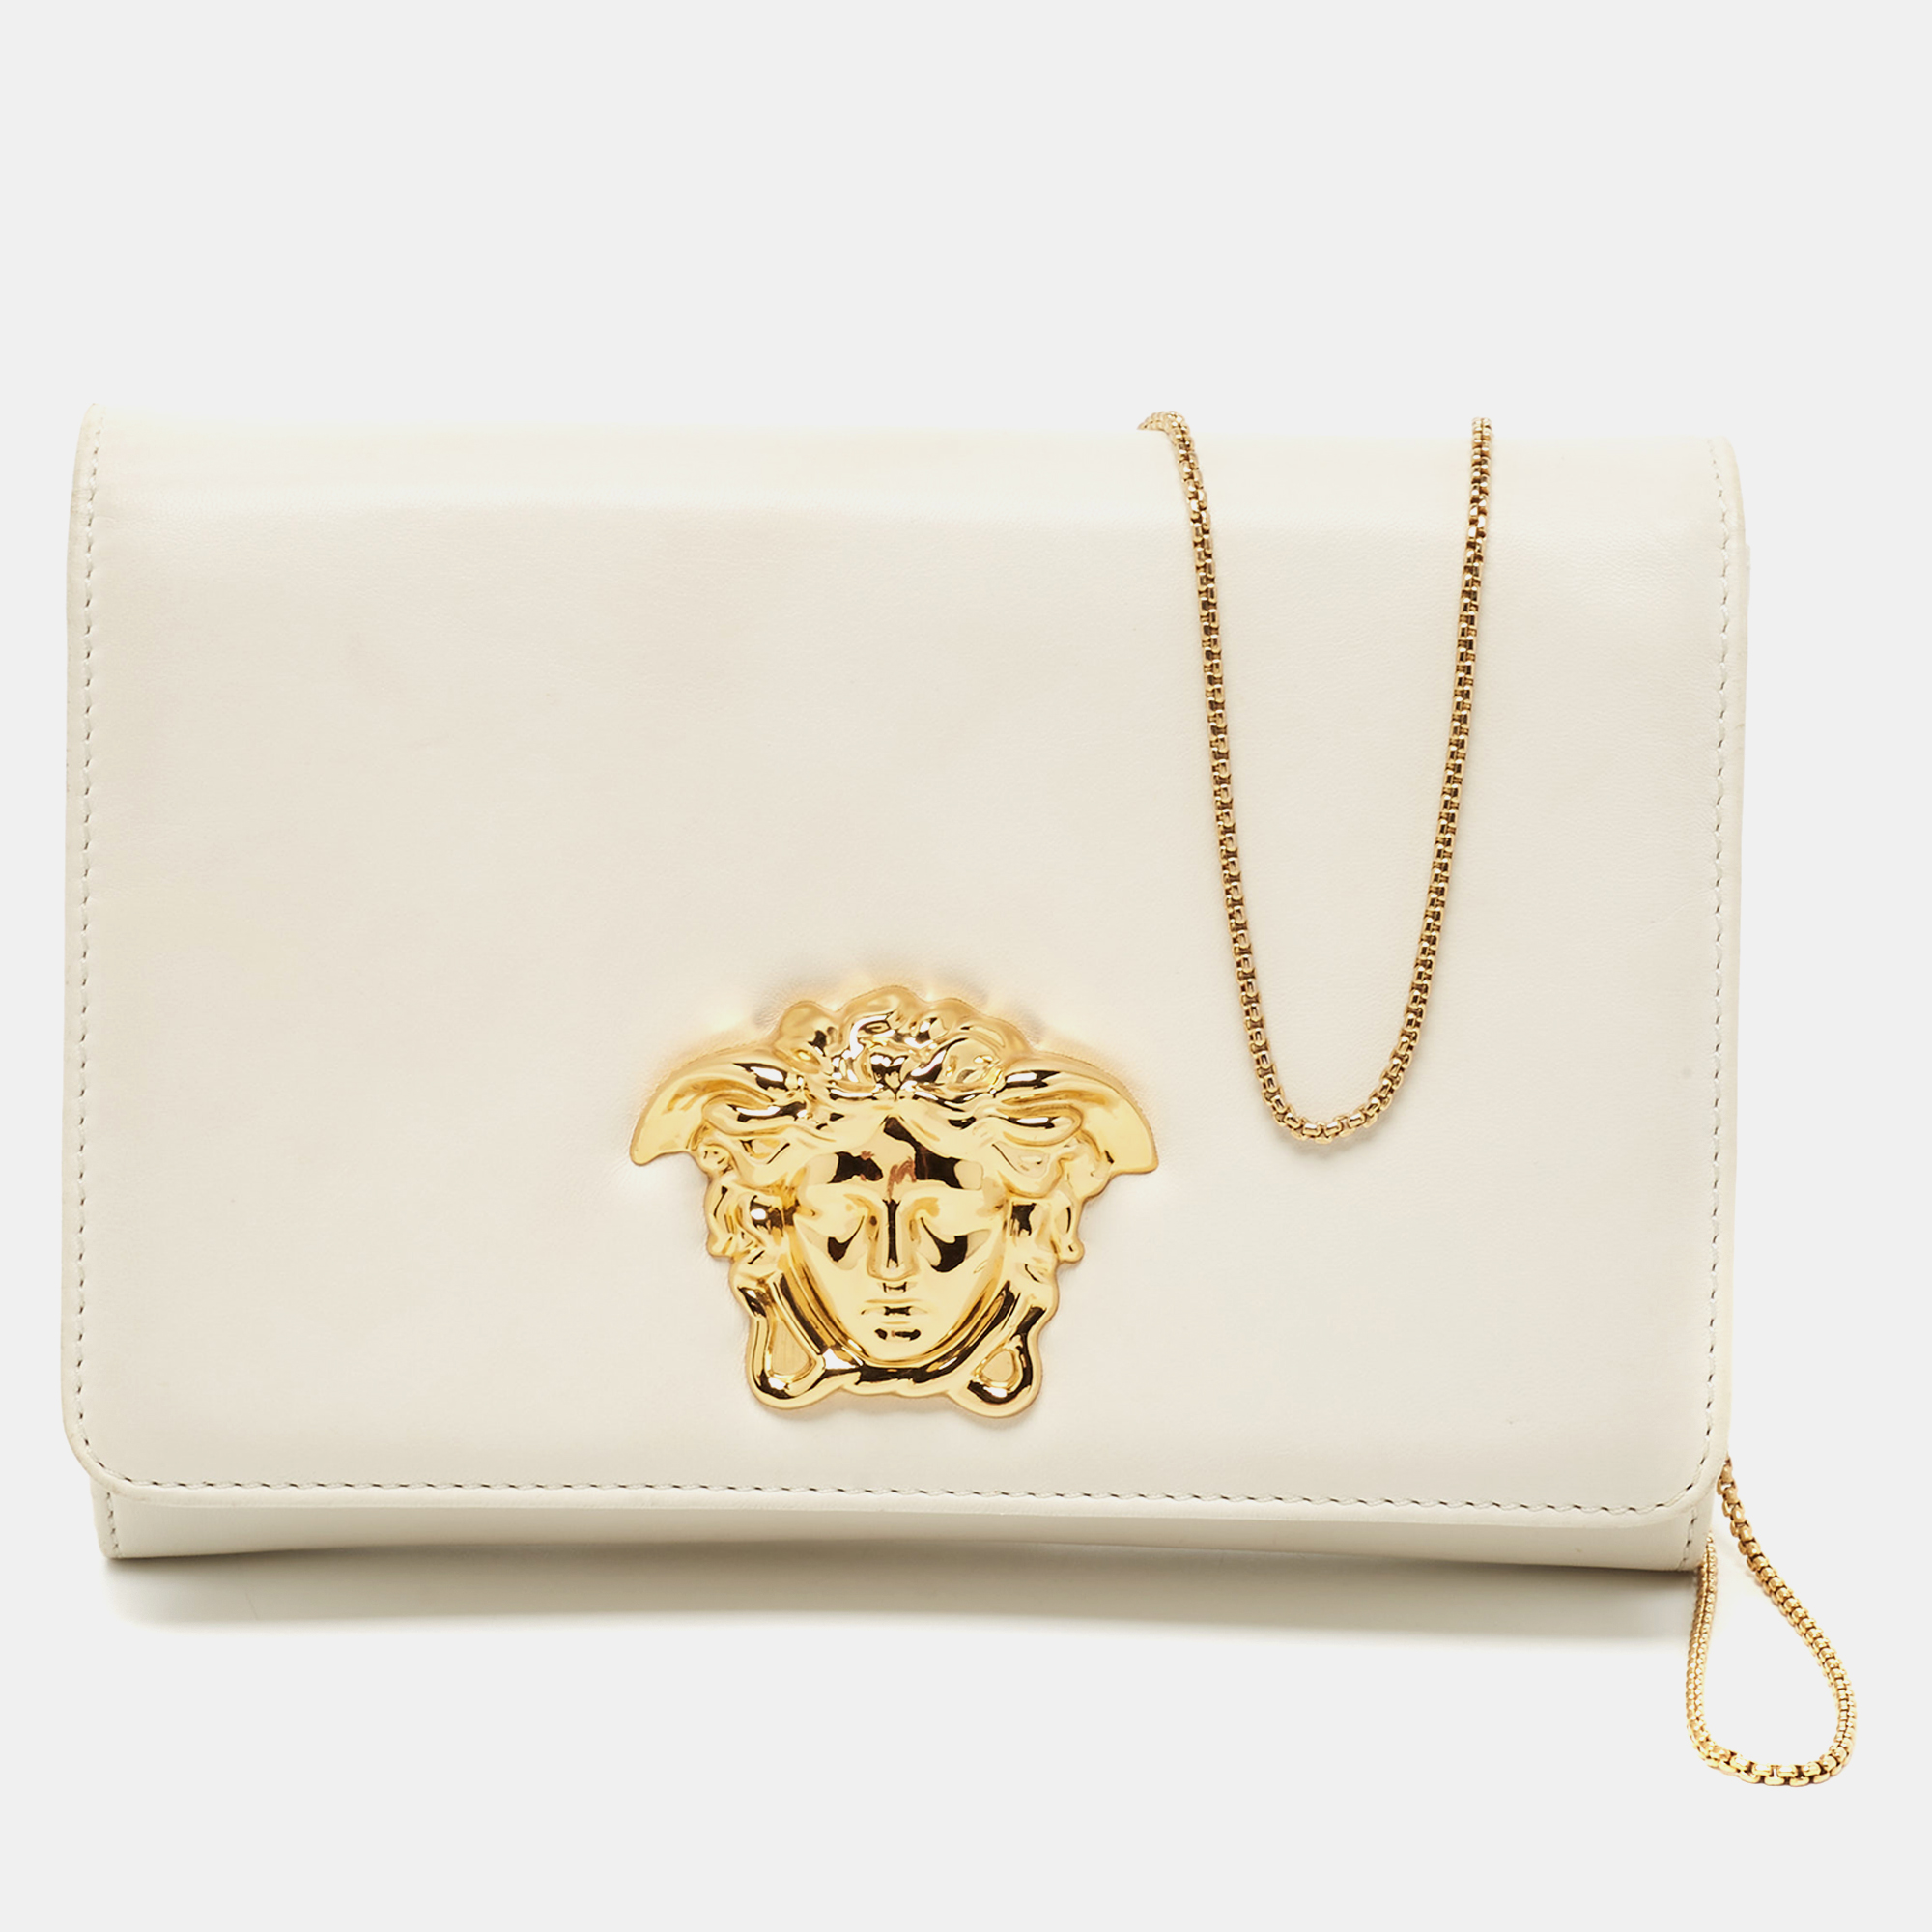 Versace Off White Leather Medusa Chain Clutch